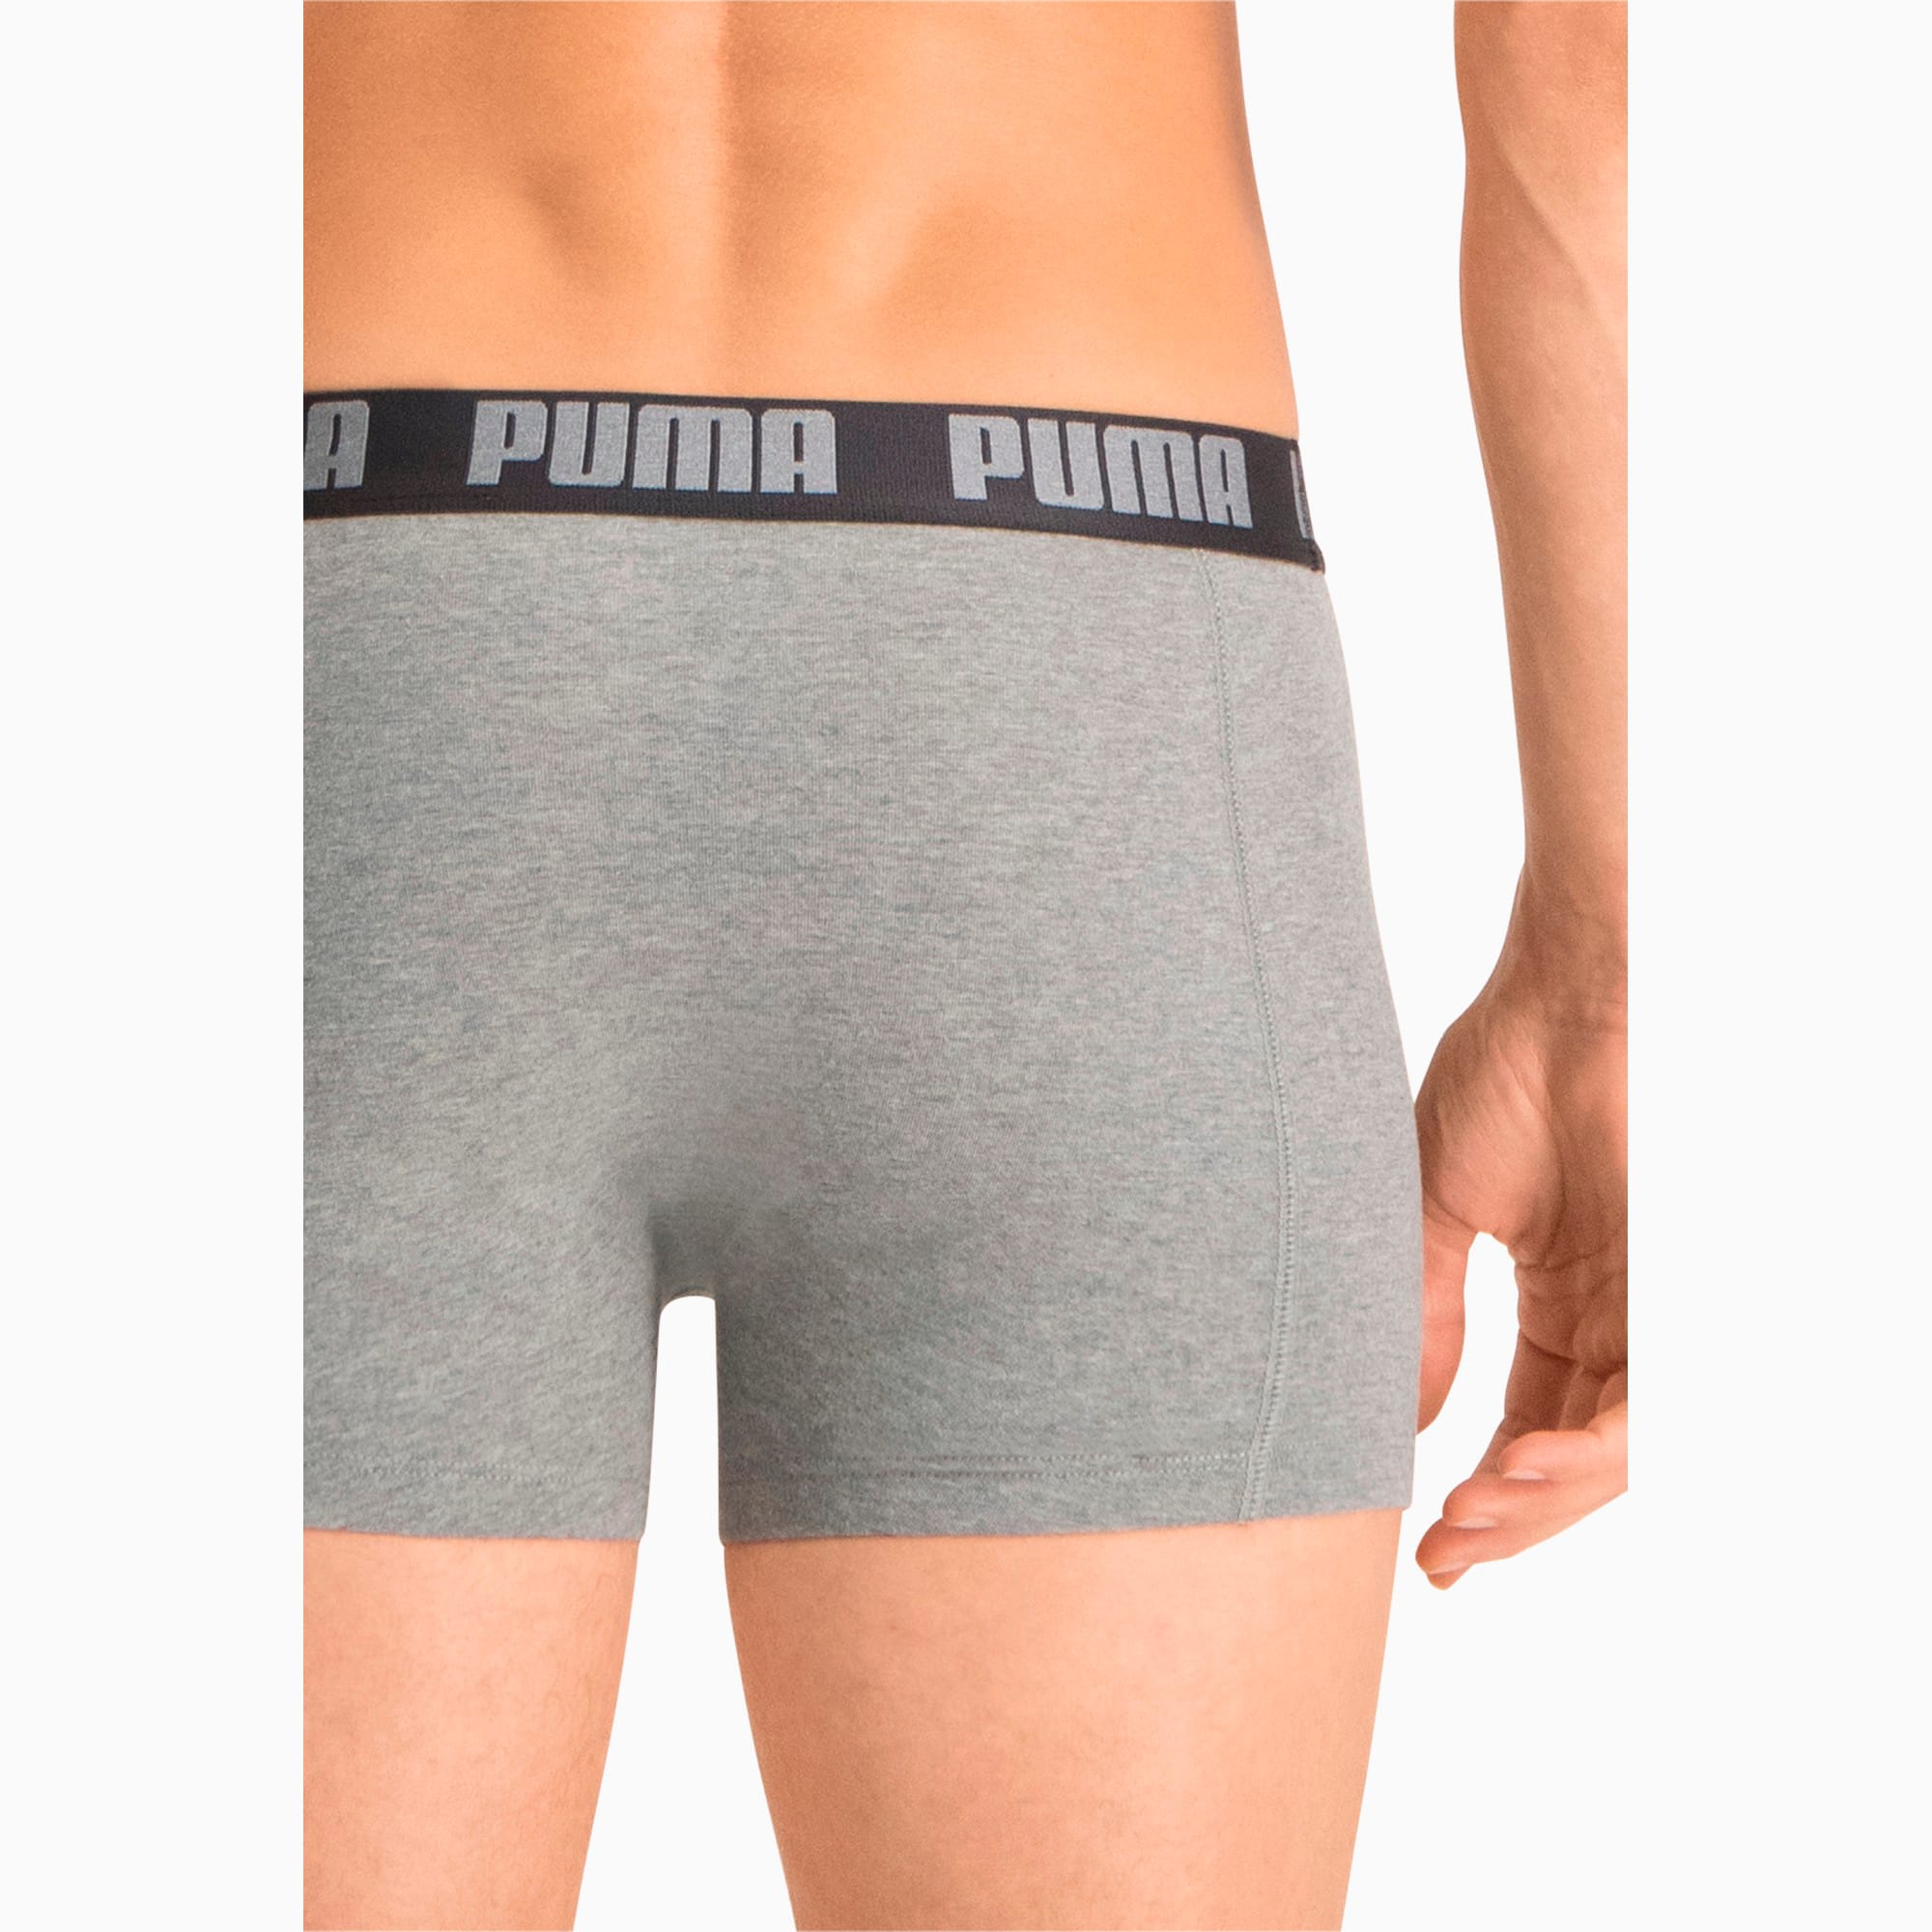 PUMA - Pack 2 Boxers Everyday Comfort Cotton Stretch 521015001 036 020  Hombre